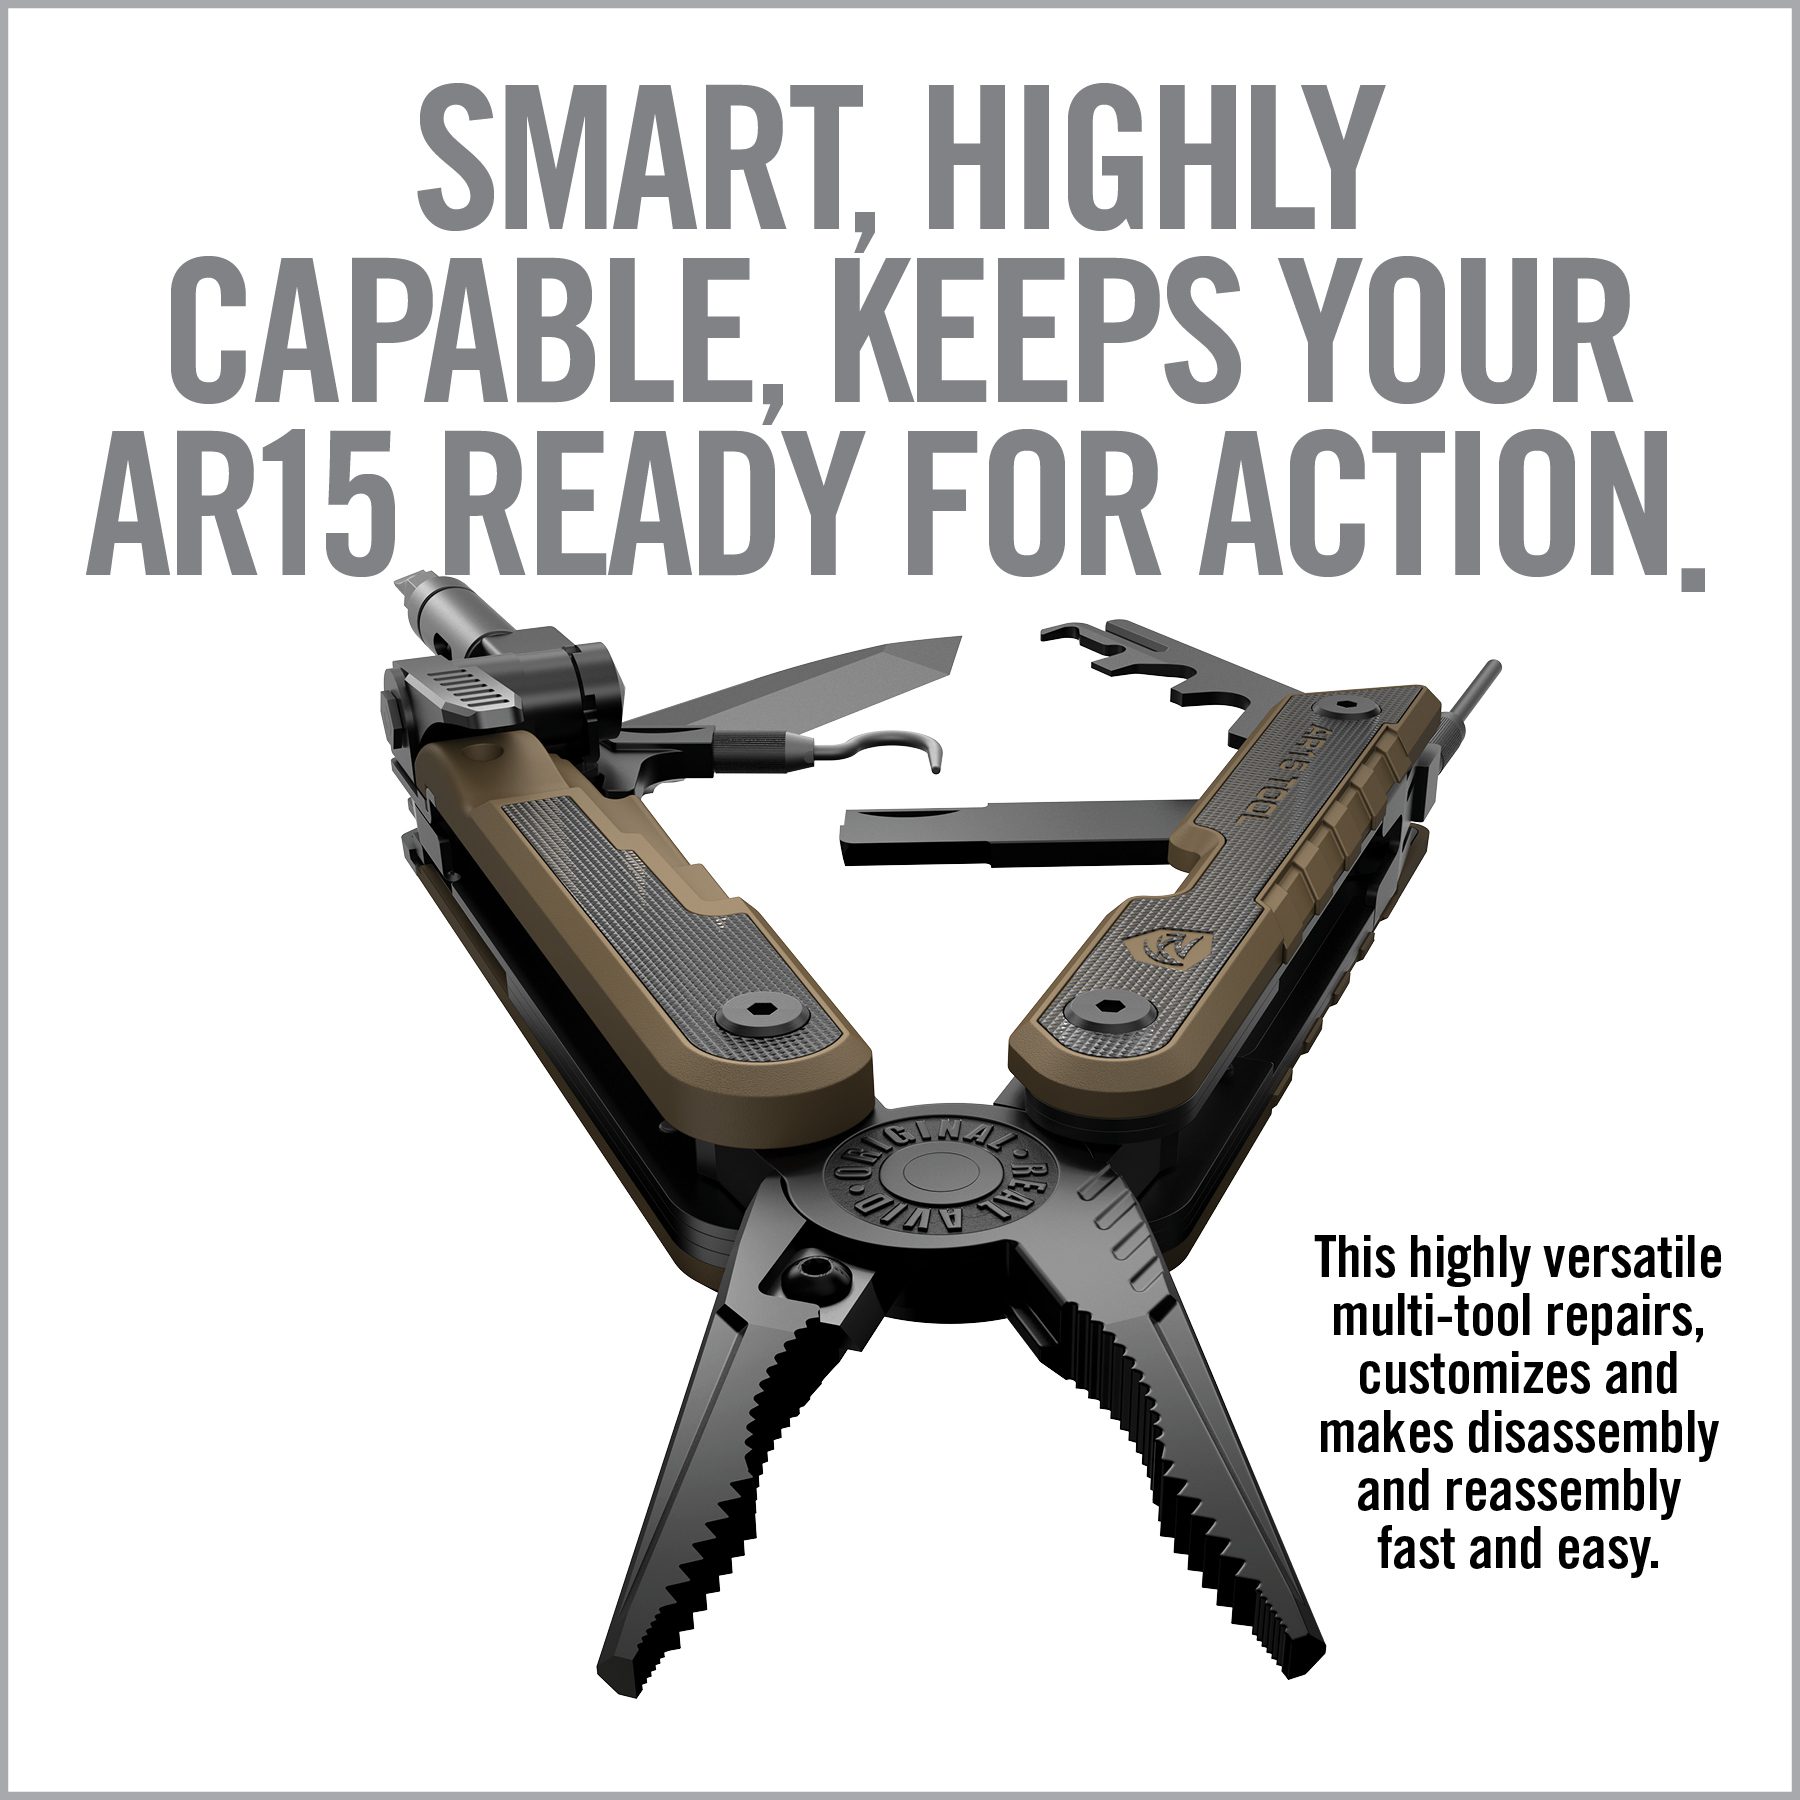 an advertisement for swiss army knifes with the caption smart, highly capable, keeps your art ready